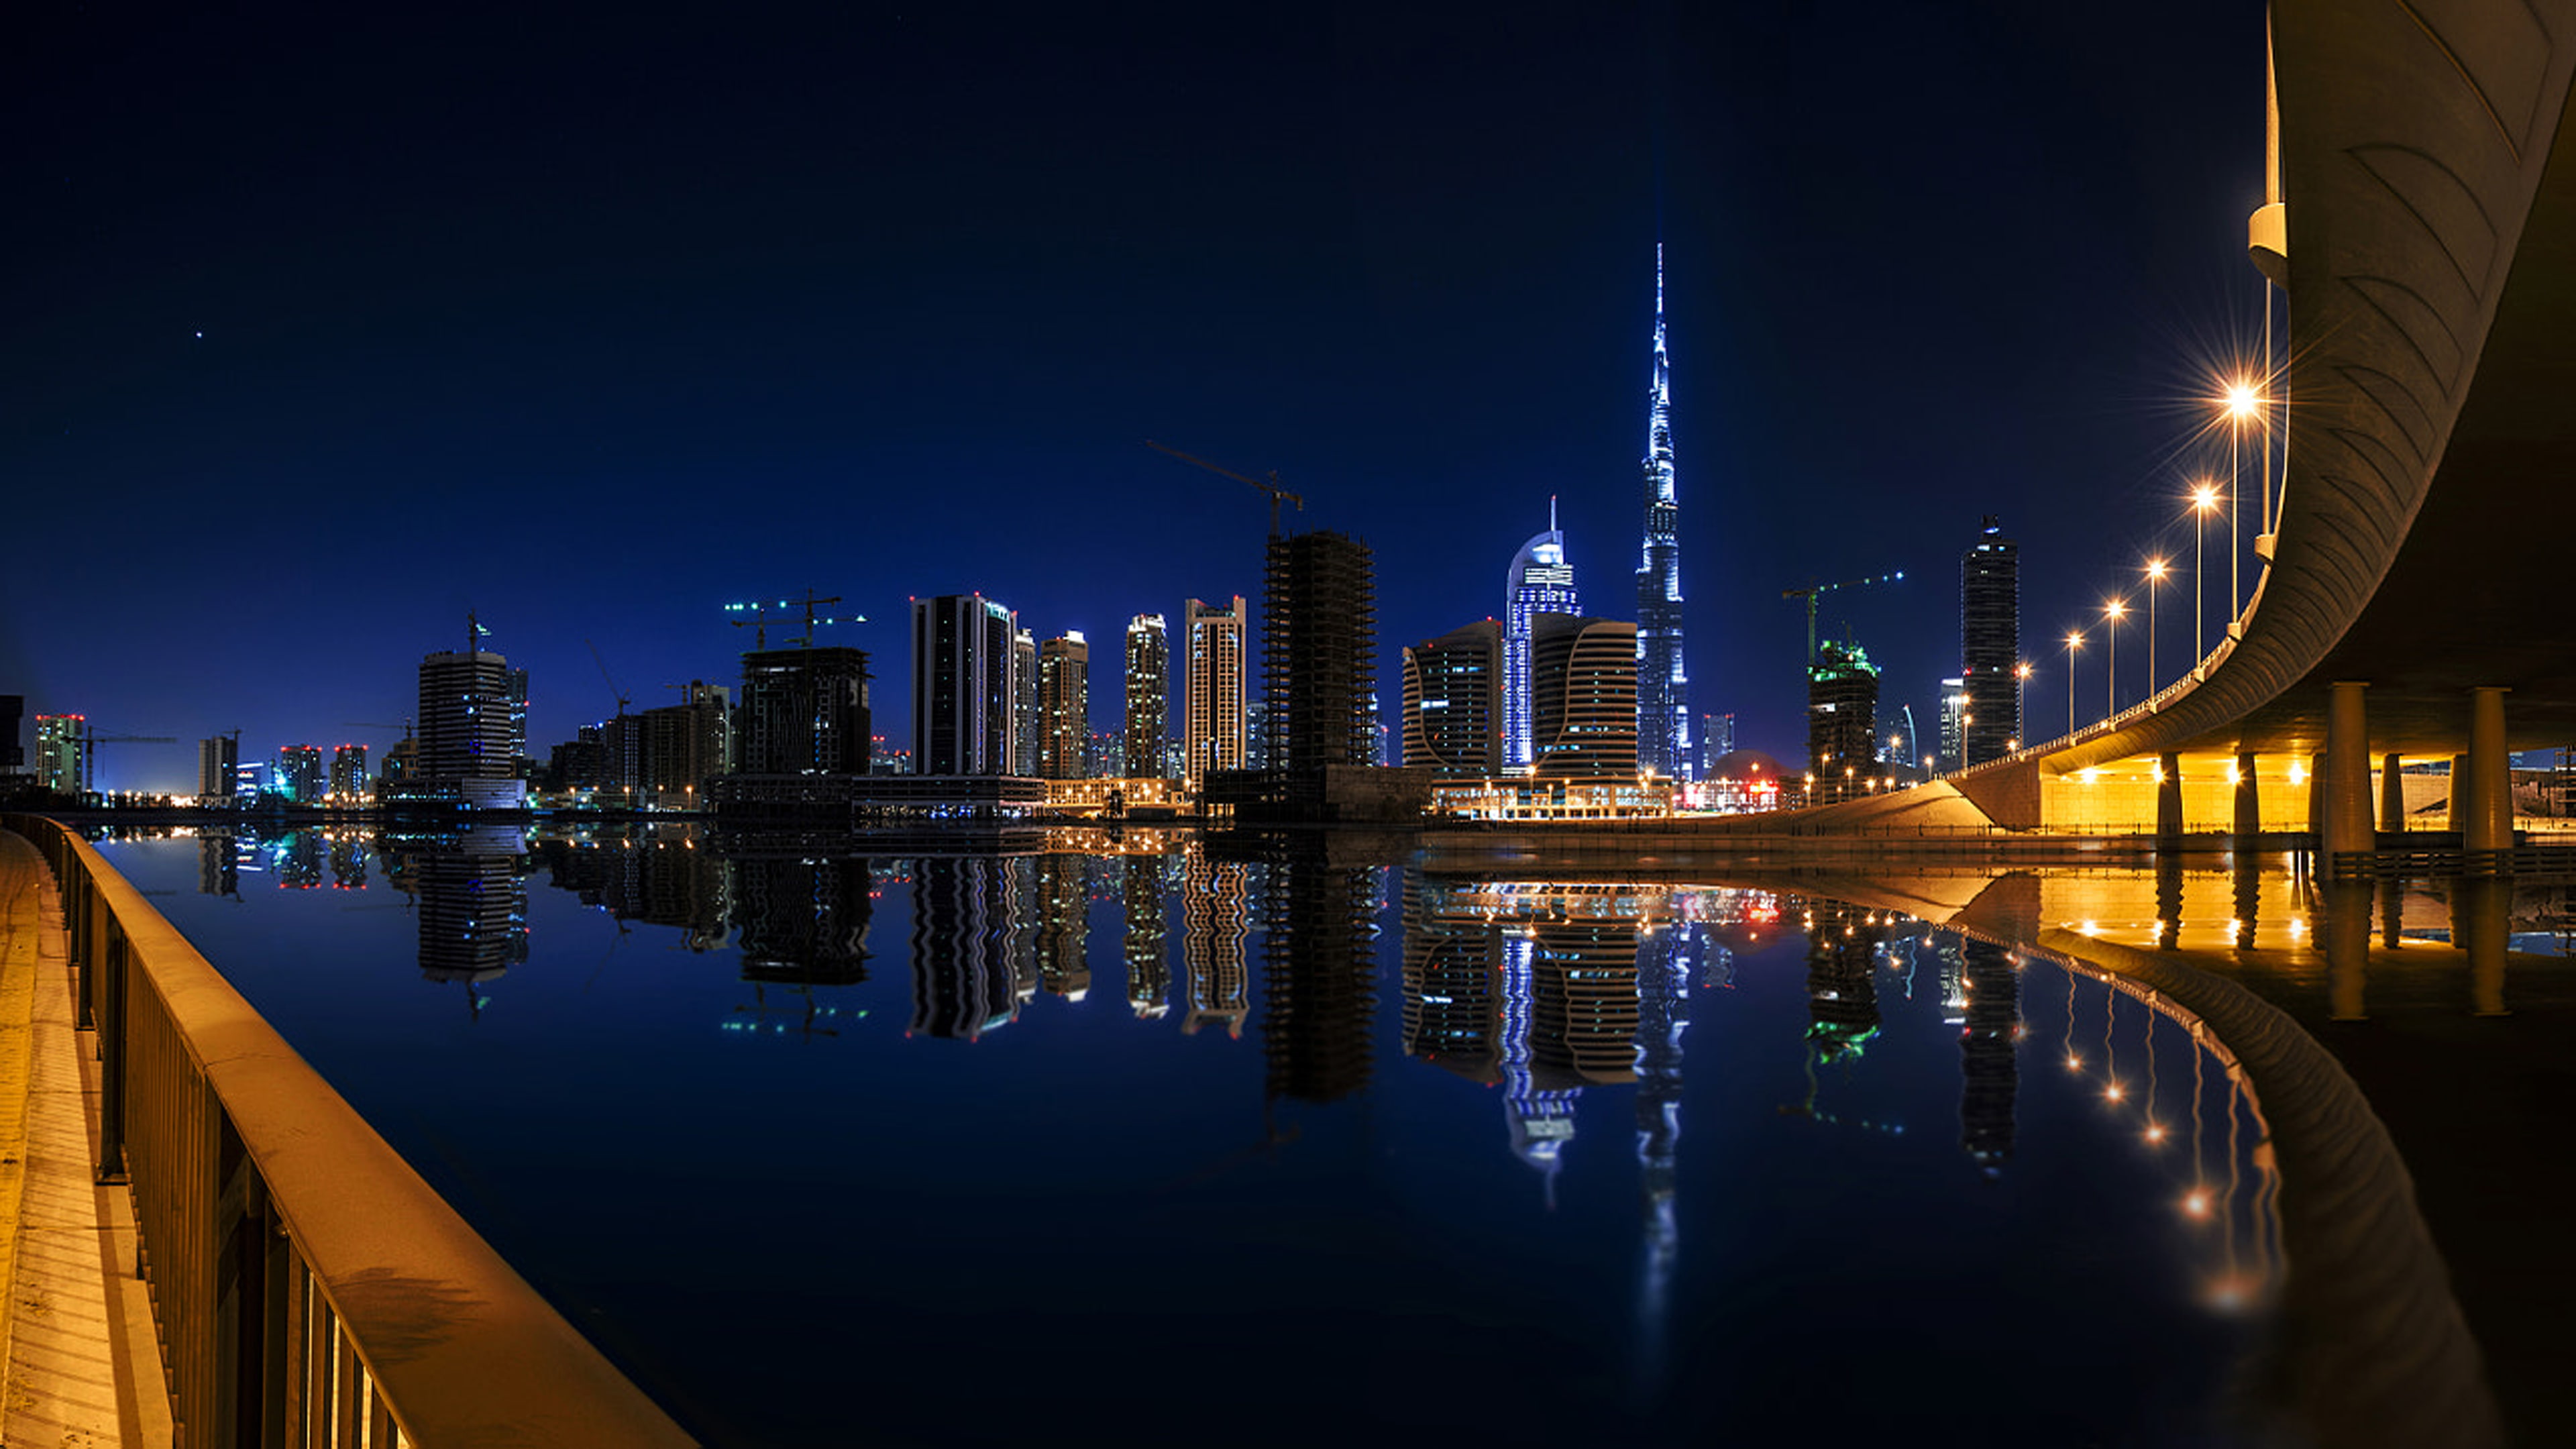 United Arab Emirates Calm Night In Dubai City And Architecture Hd Desktop Wallpapers For Tablets And Mobile Phones Free Download 3840×2160